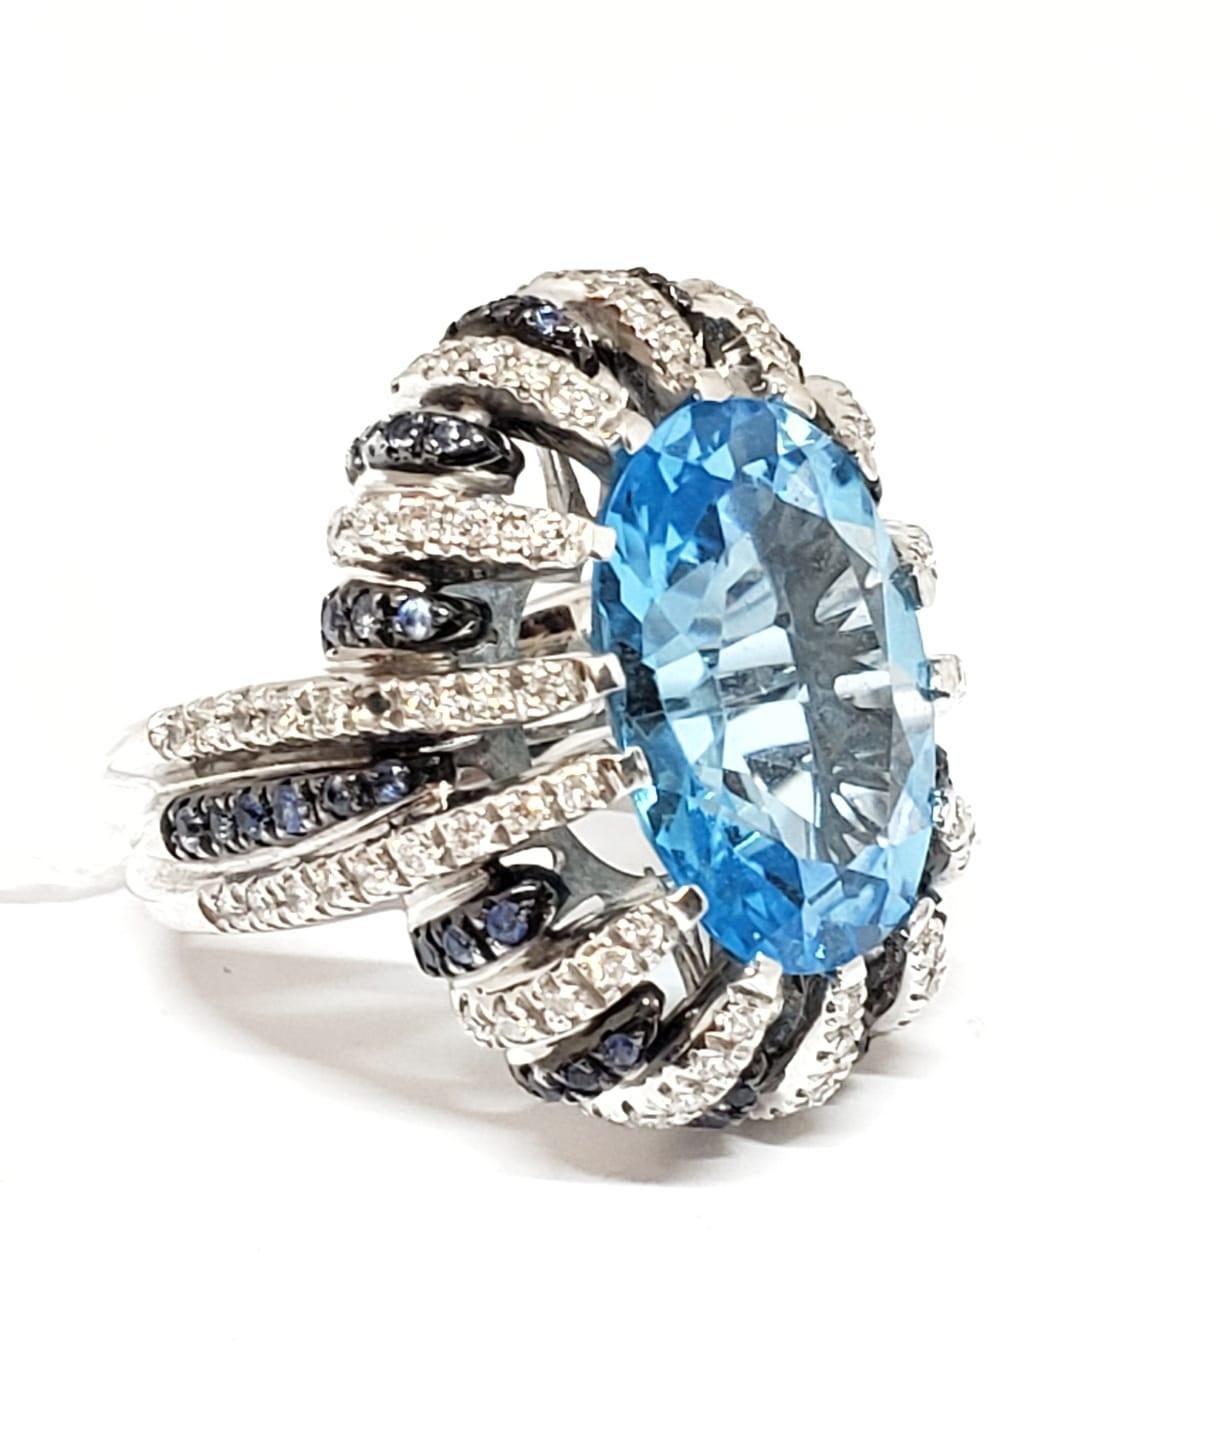 Andreoli Diamond Blue Topaz Blue Sapphire 18 Karat White Gold Ring

This ring features:
- 0.85 Carat Diamond
- 2.70 Carat Blue Topaz
- 0.55 Carat Blue Sapphire
- 20.00 Gram 18K White Gold
- Made In Italy